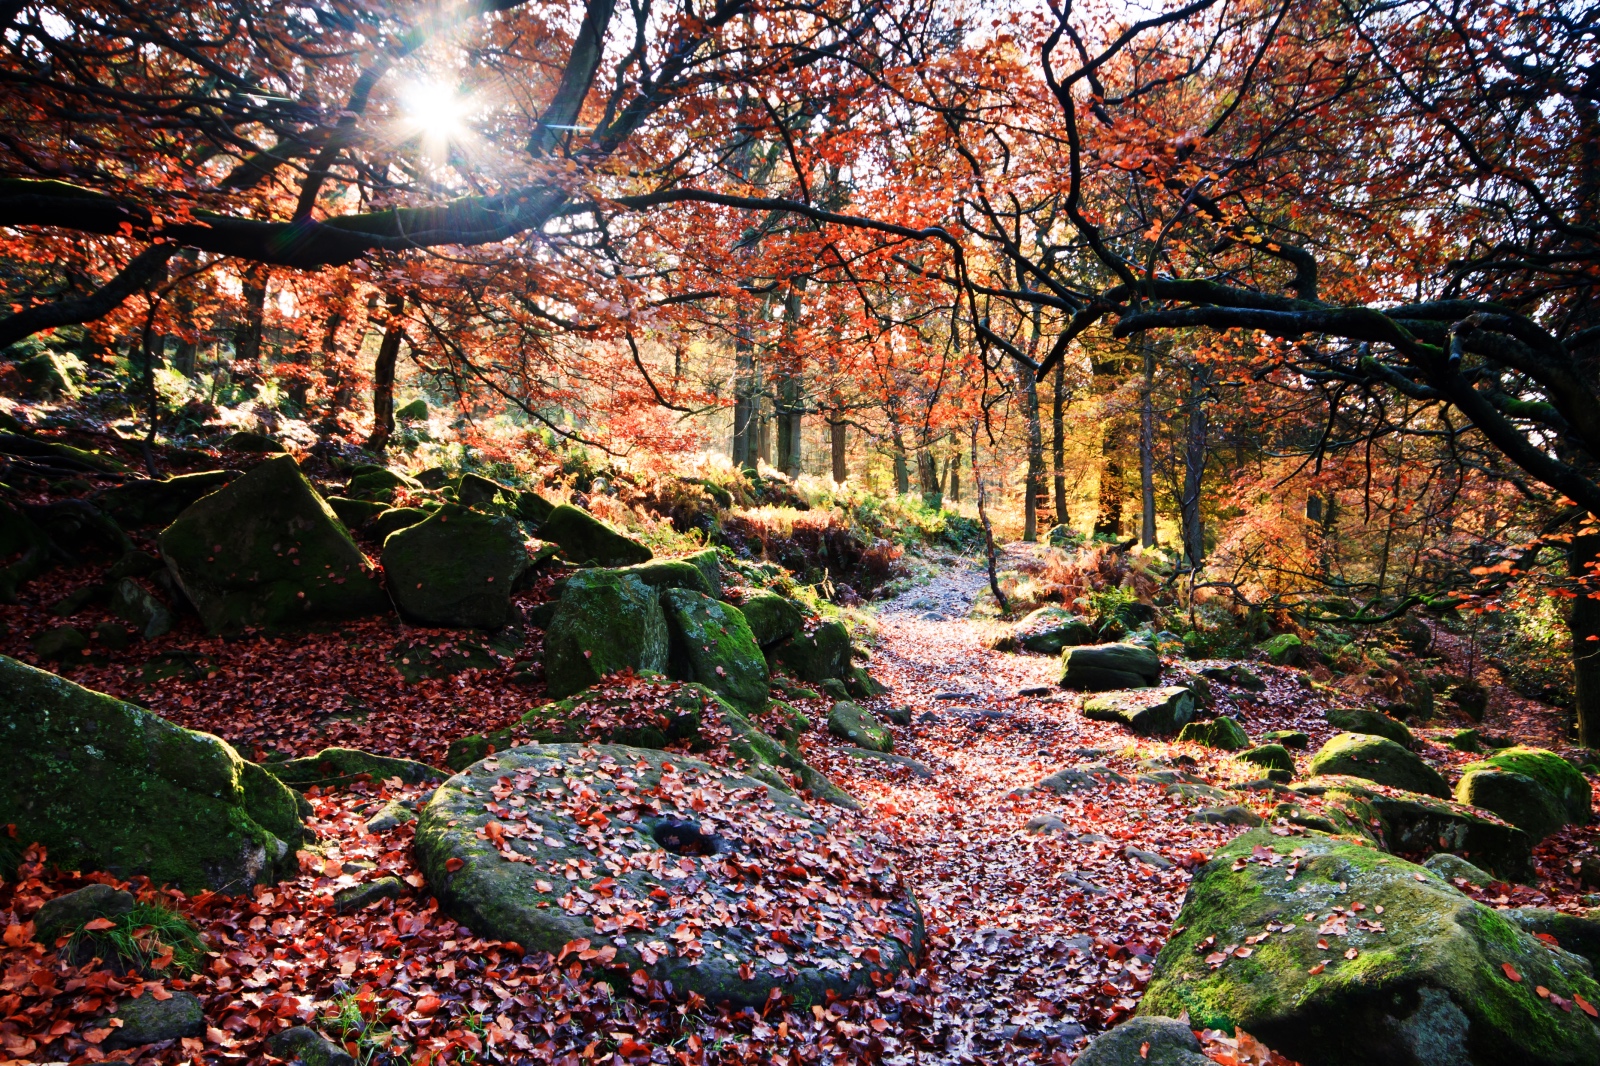 Autumnal wooded scene